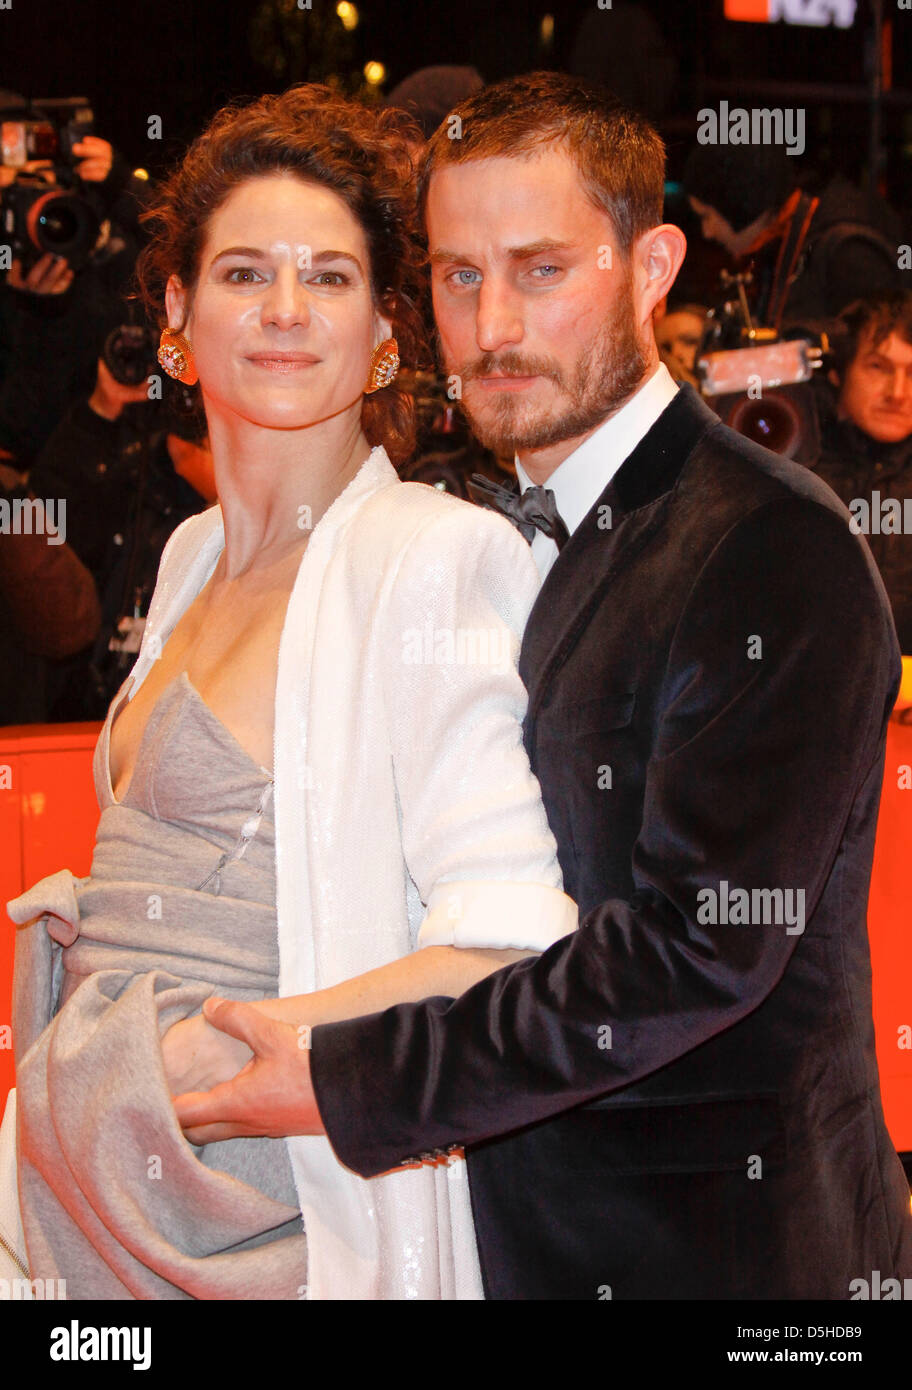 German actors Bibiana Beglau and Clemens Schick arrive at the opening of the 60th Berlinale, an international film festival, at Berlinale Palast in Berlin, Germany, 11 February 2010. Photo: Hubert Boesl Stock Photo